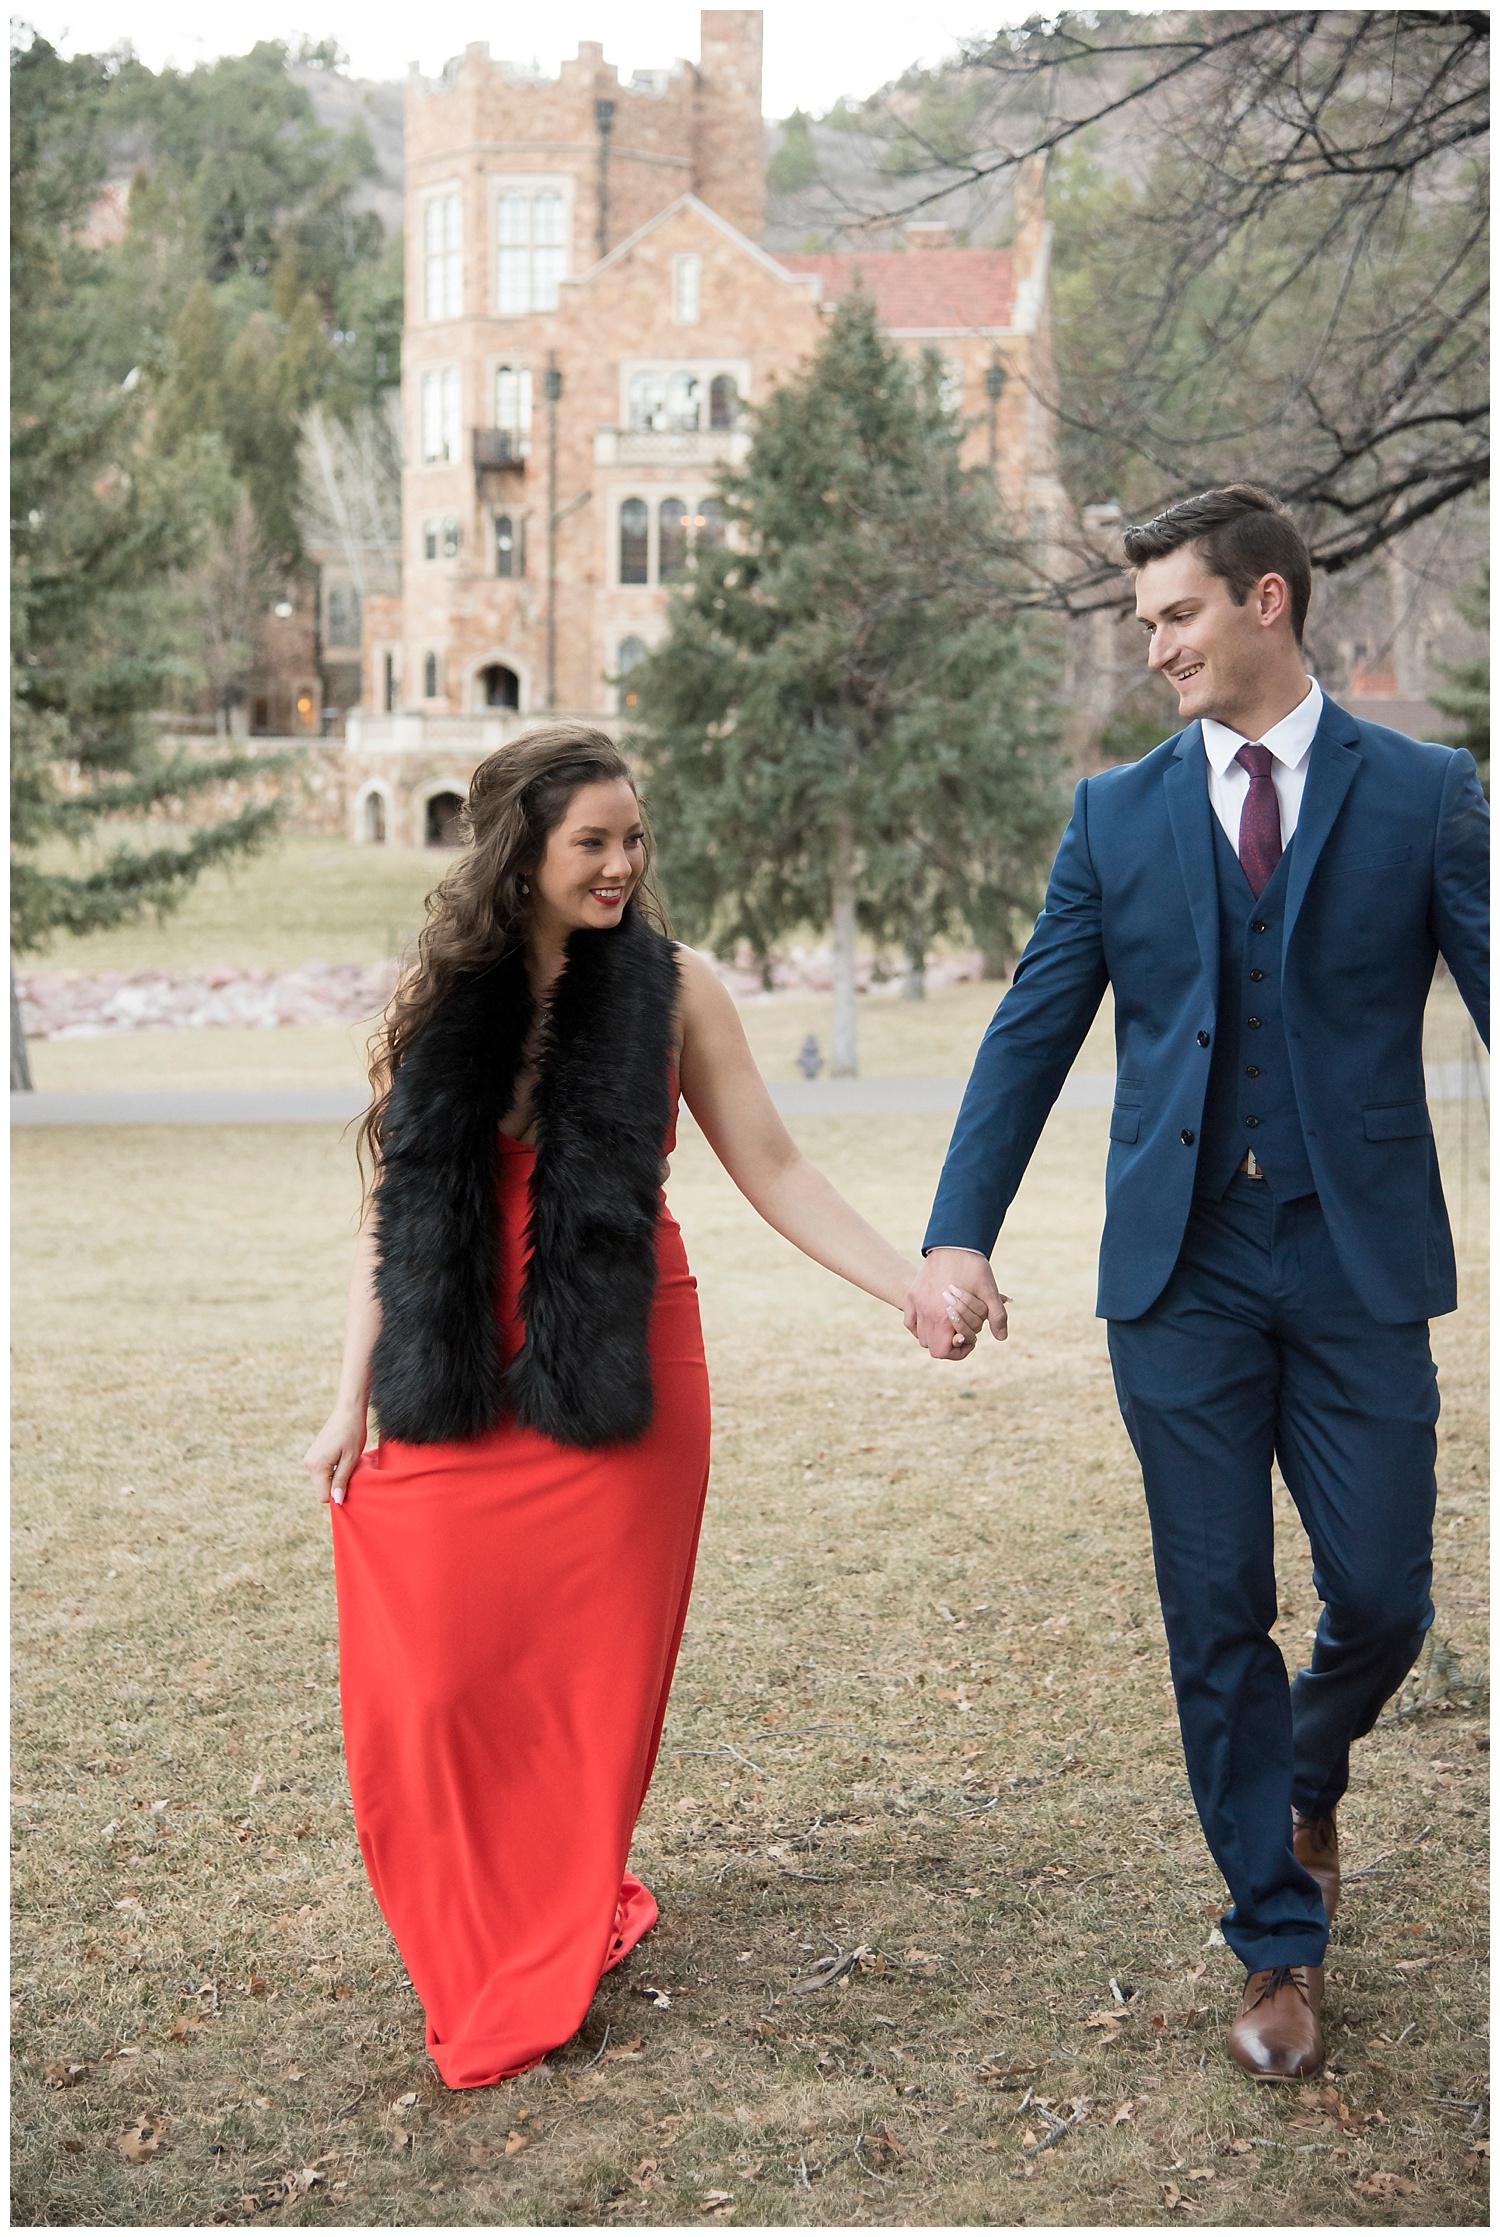 Real Couple Holding Hands| Nicholas and Eden's Surprise Proposal at Glen Eyrie Castle | Colorado Springs Photographer | Farm Wedding Photographer | Apollo Fields Wedding Photojournalism